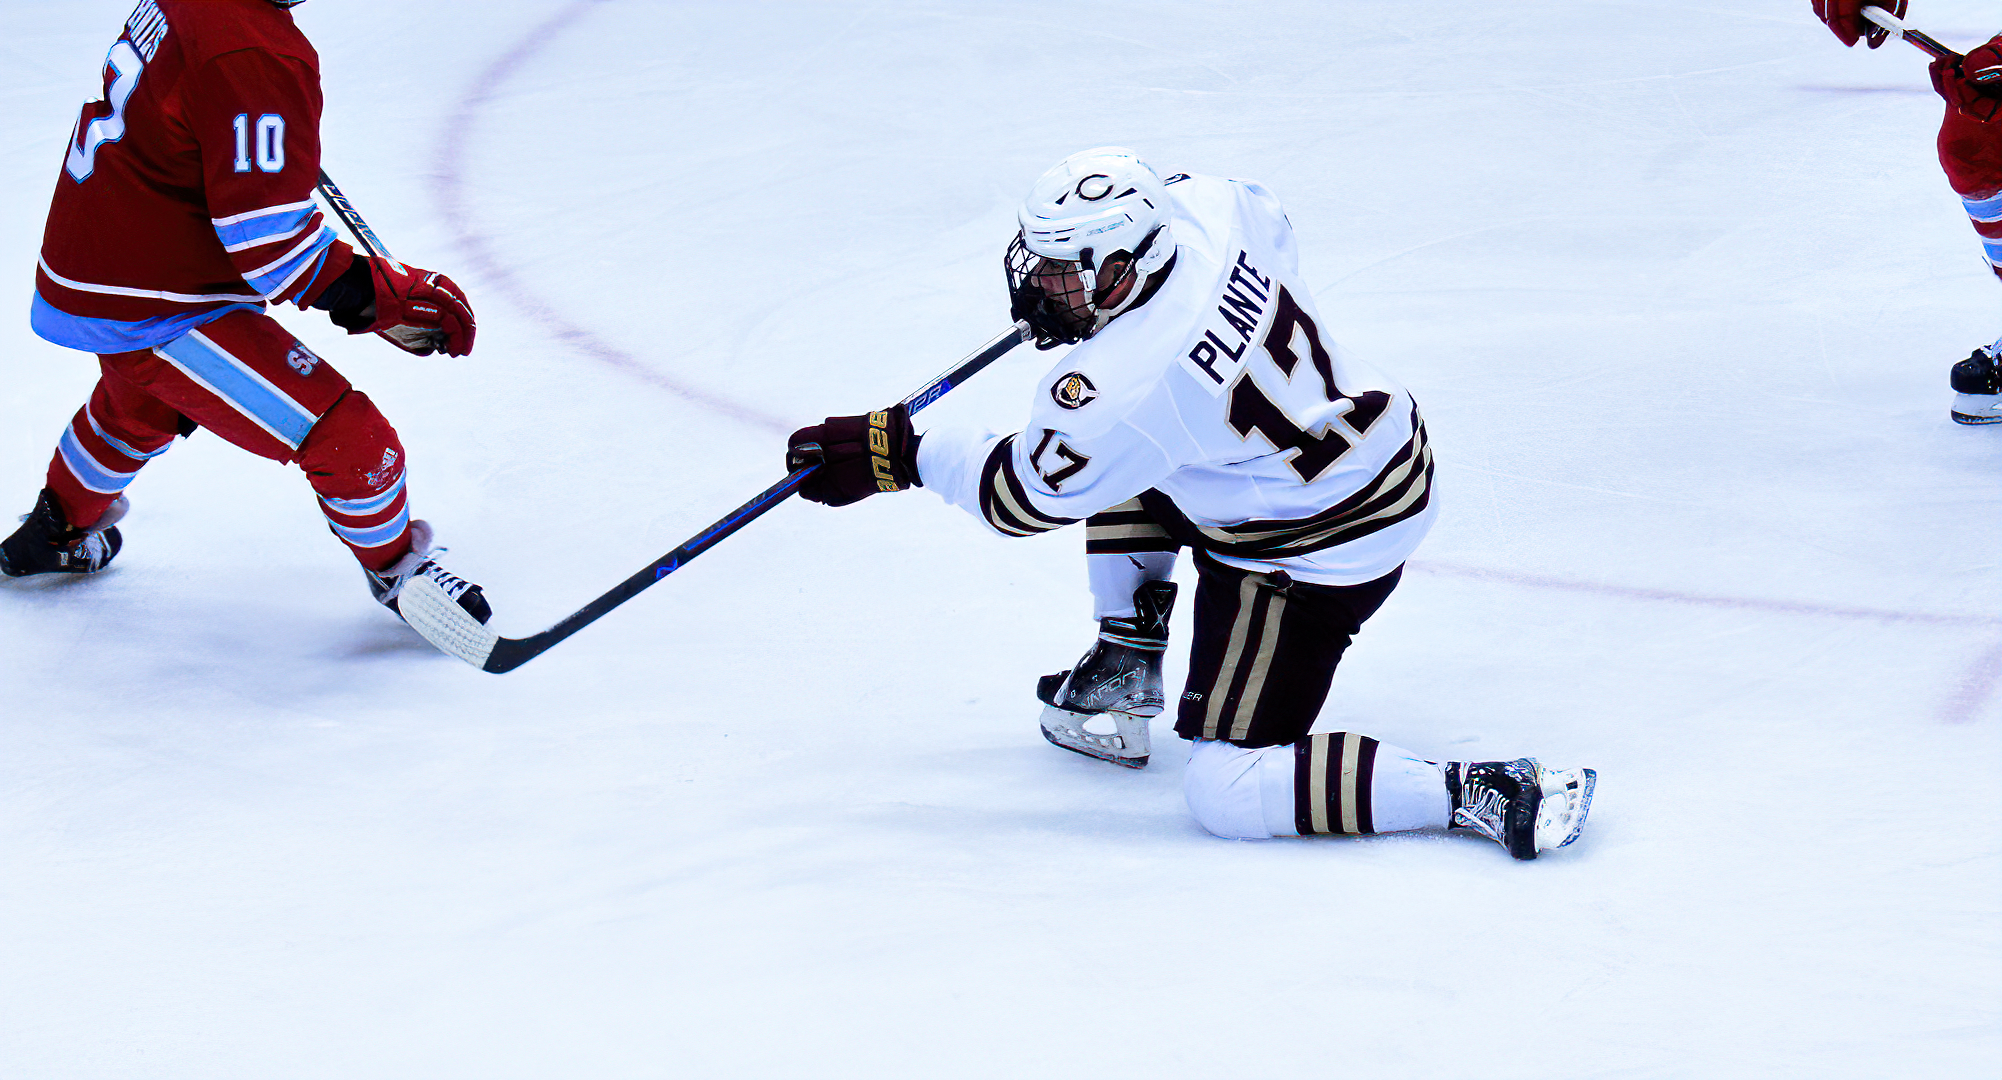 Mason Plante drops to one knee to fire home the Cobbers' lone goal in the series finale with SJU. The goal was Plante's seventh of the year.